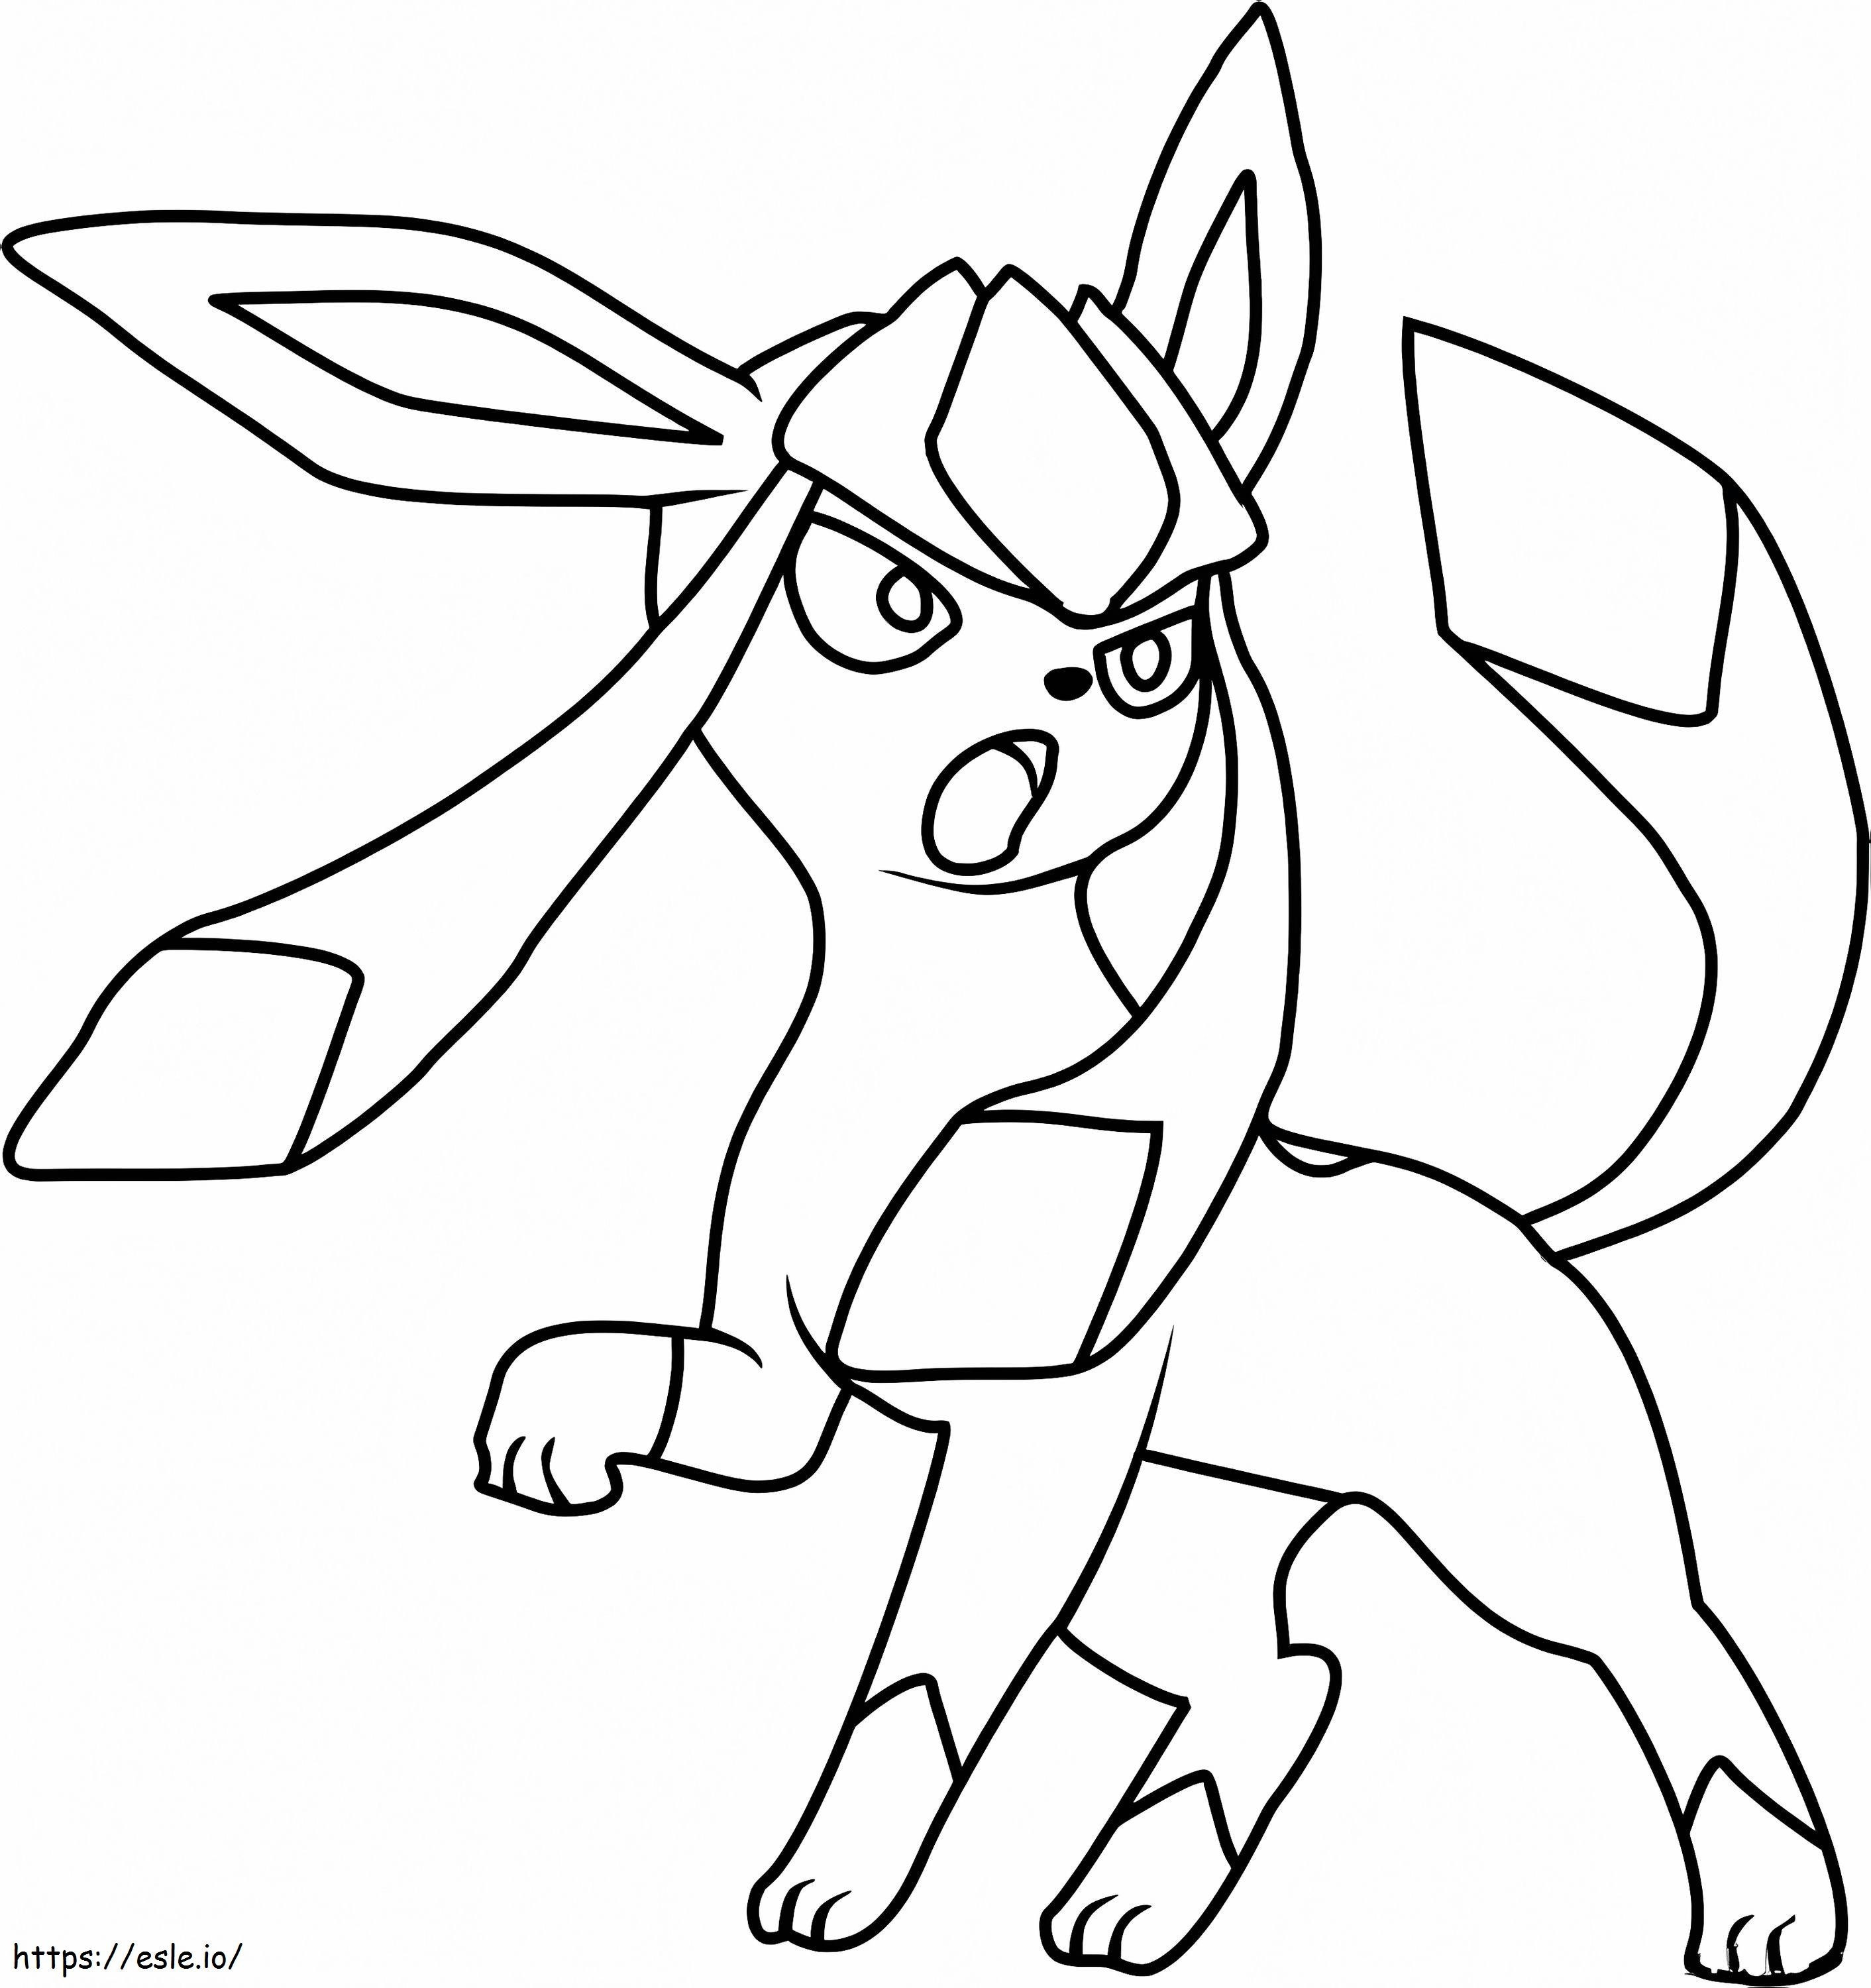 Glaceon 2 coloring page